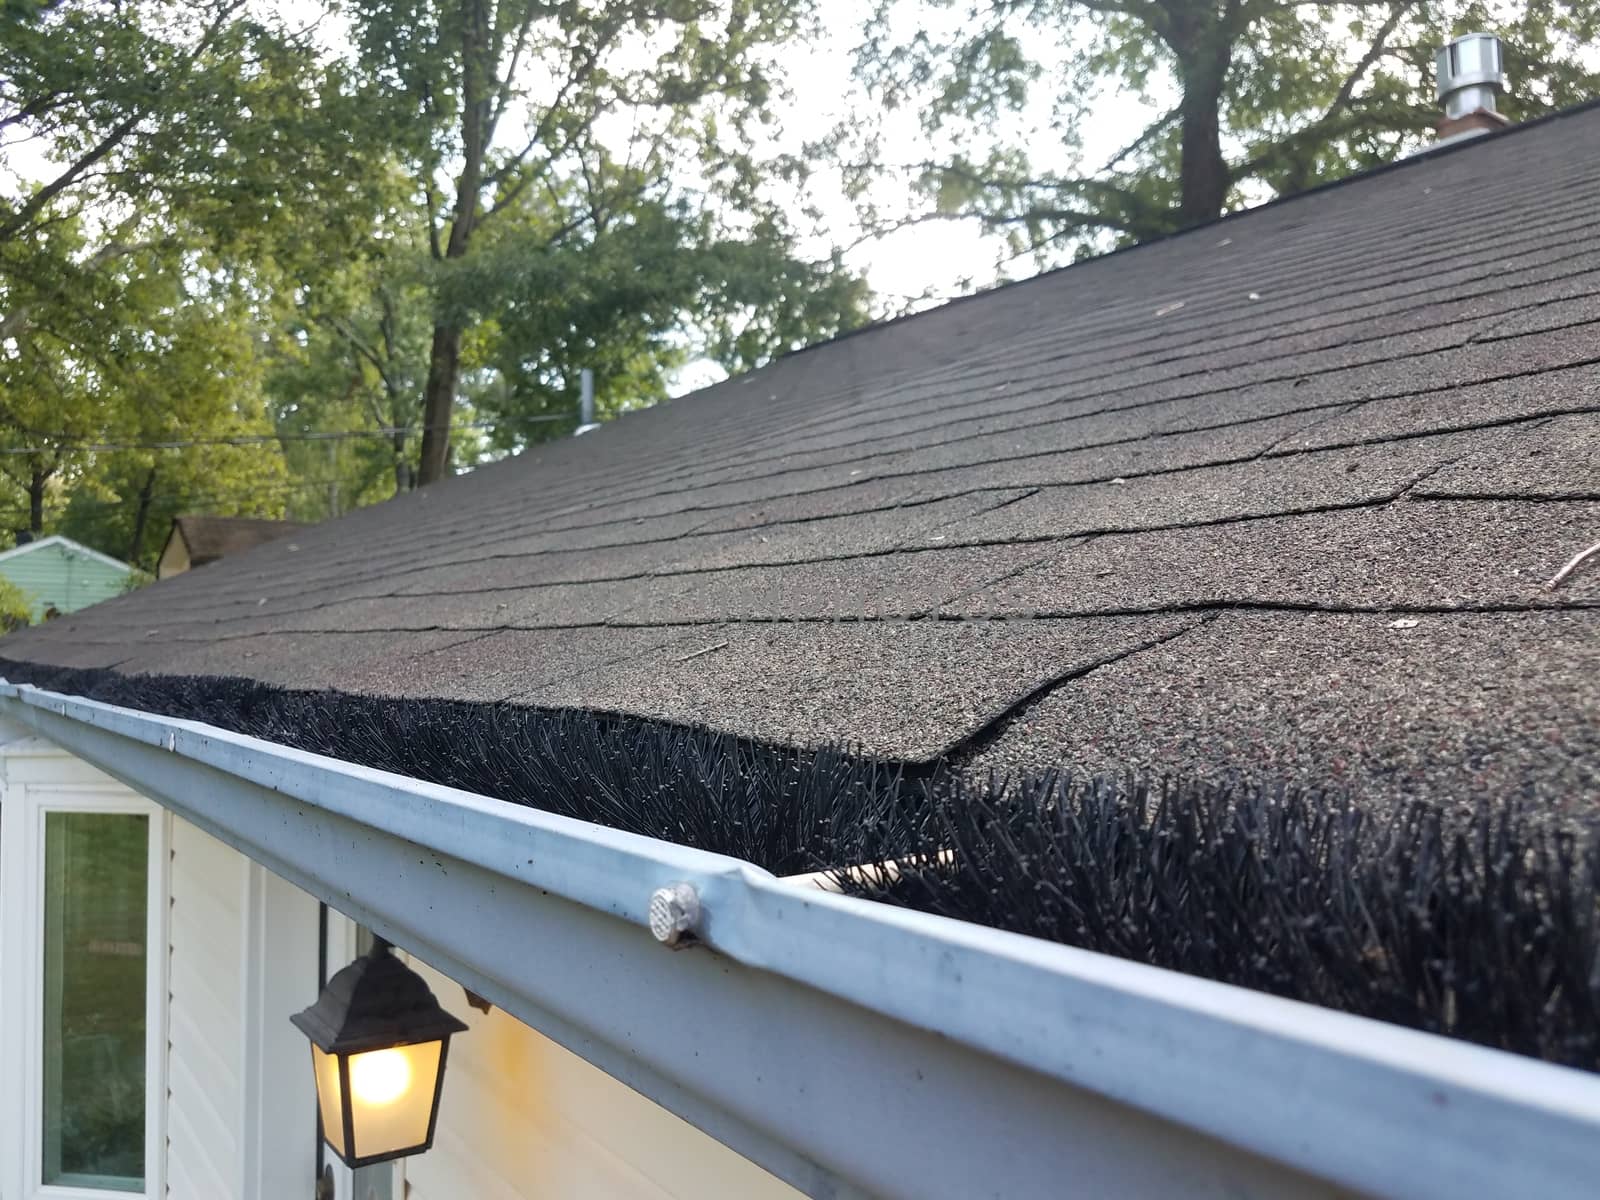 black pipe cleaner in cleaned gutter with roof shingles on house